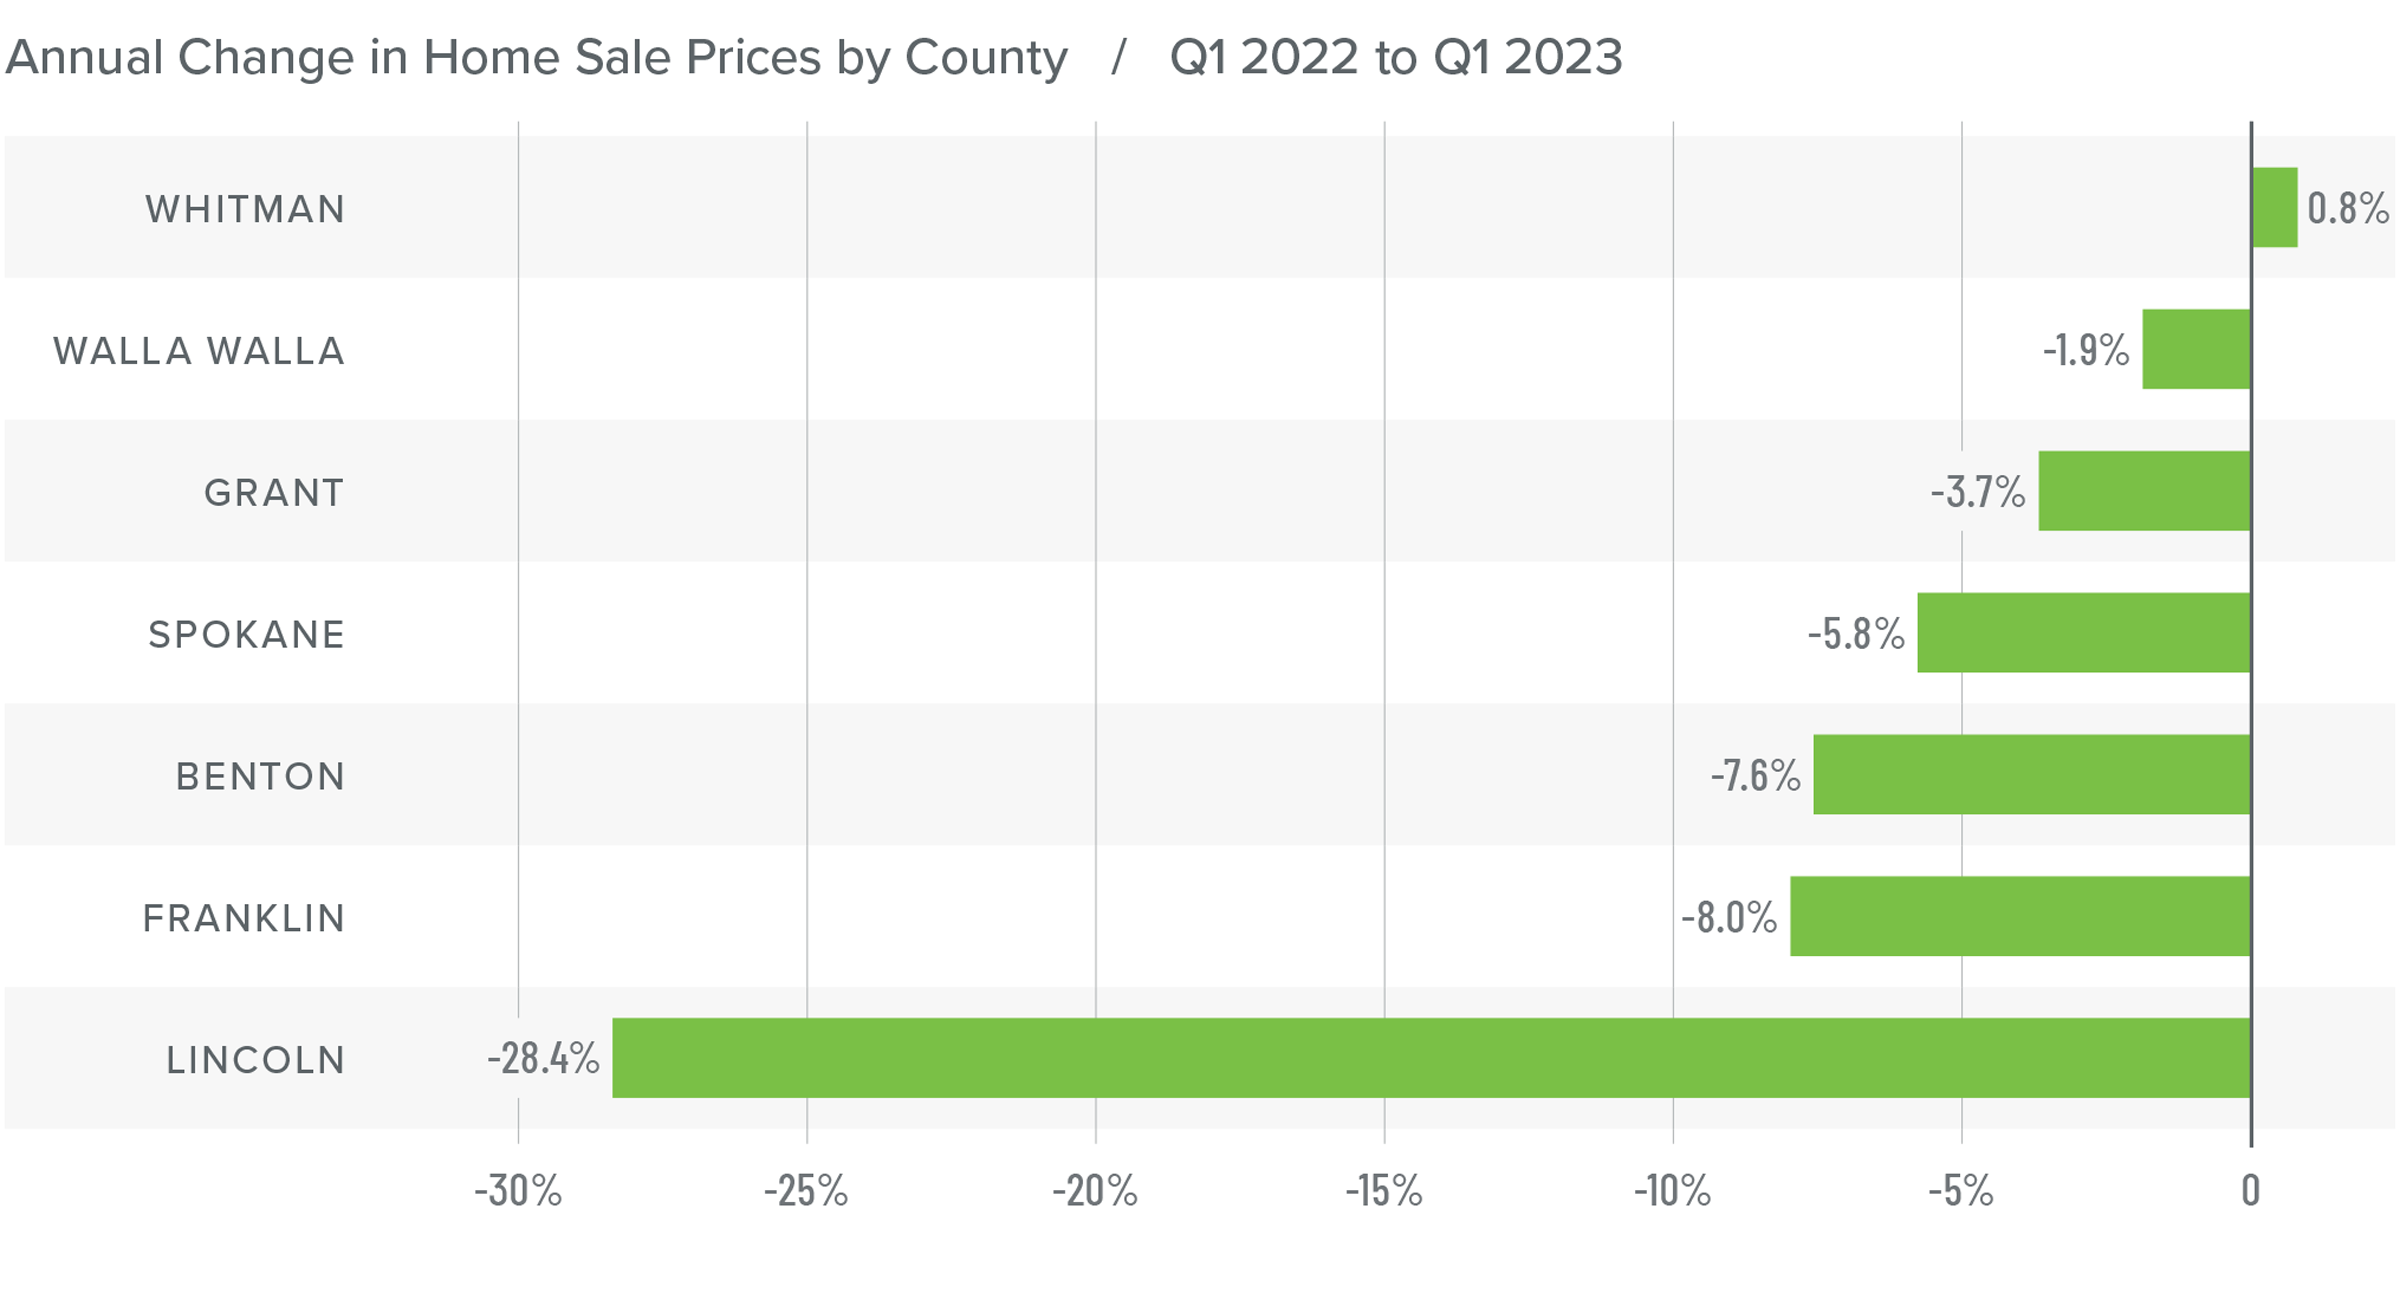 A bar graph showing the annual change in home sale prices for various counties in Eastern Washington from Q1 2022 to Q1 2023. All counties have a negative percentage year-over-year change, except Whitman at 0.8%. Here are the rest: Walla Walla at -1.9%, Grant at -3.7%, Spokane -5.8%, Benton -7.6%, Franklin -8%, and Lincoln -28.4%.